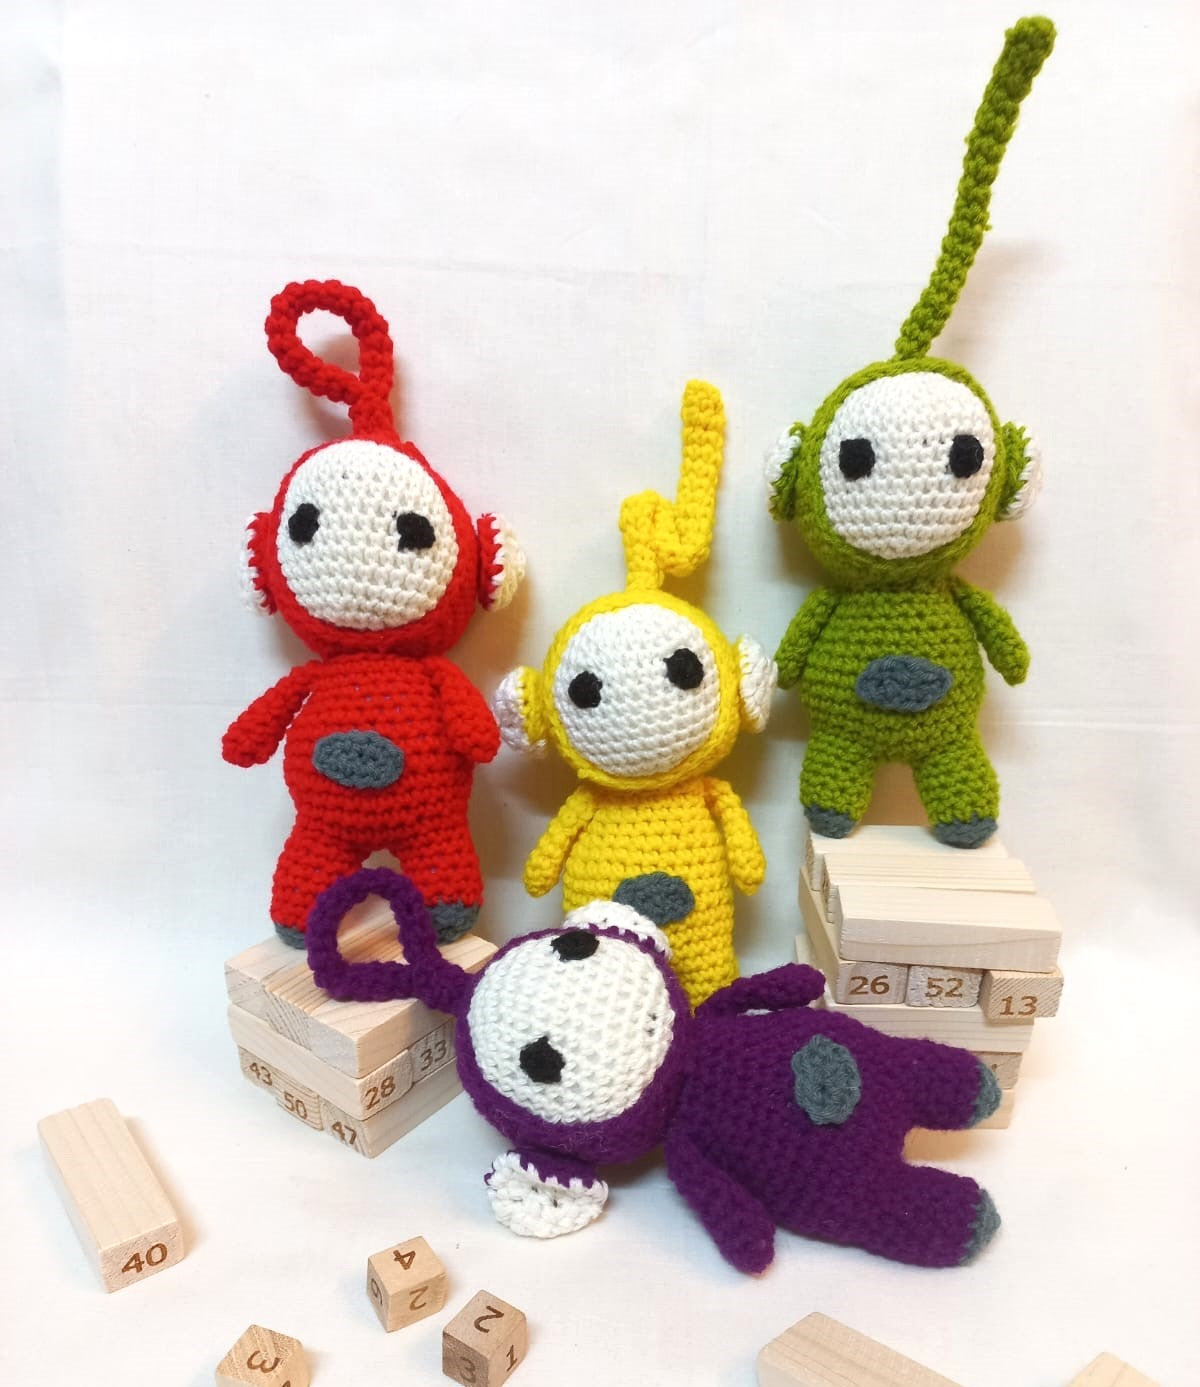 Teletubbies Set Iconic Character - Perfect for Imaginative Play